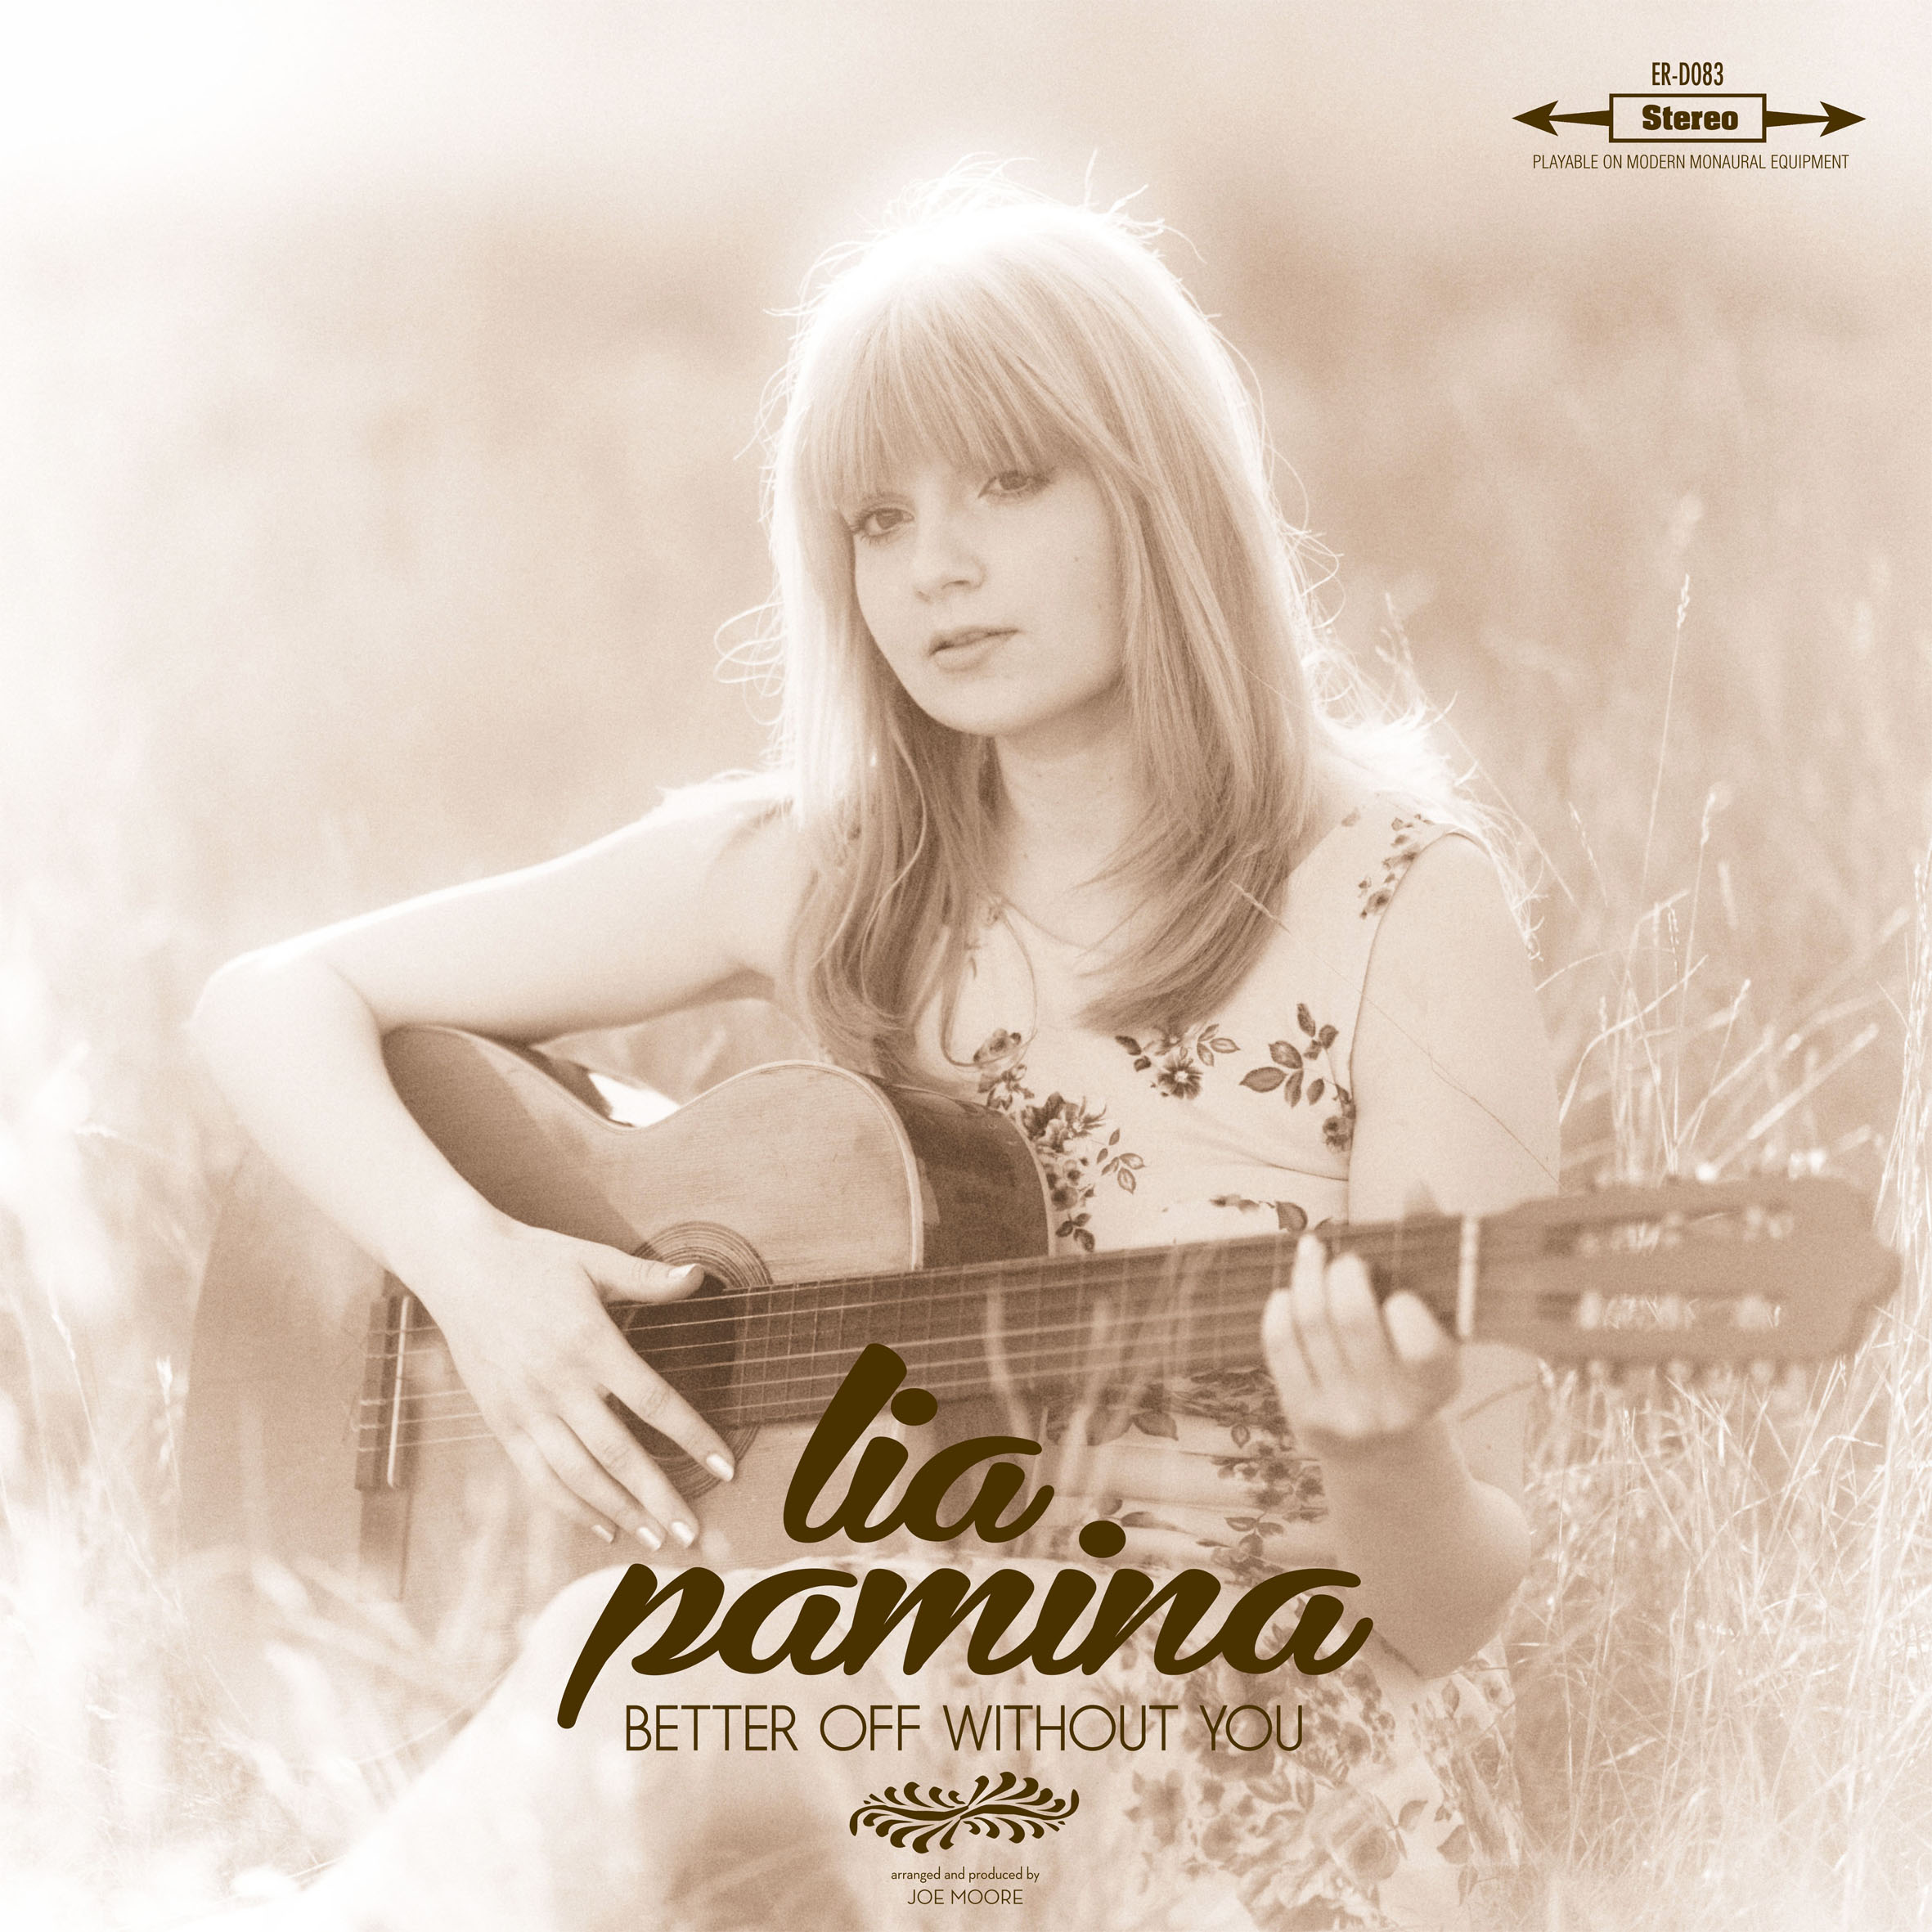 Lia Pamina "Better Off Without You" Digital Single